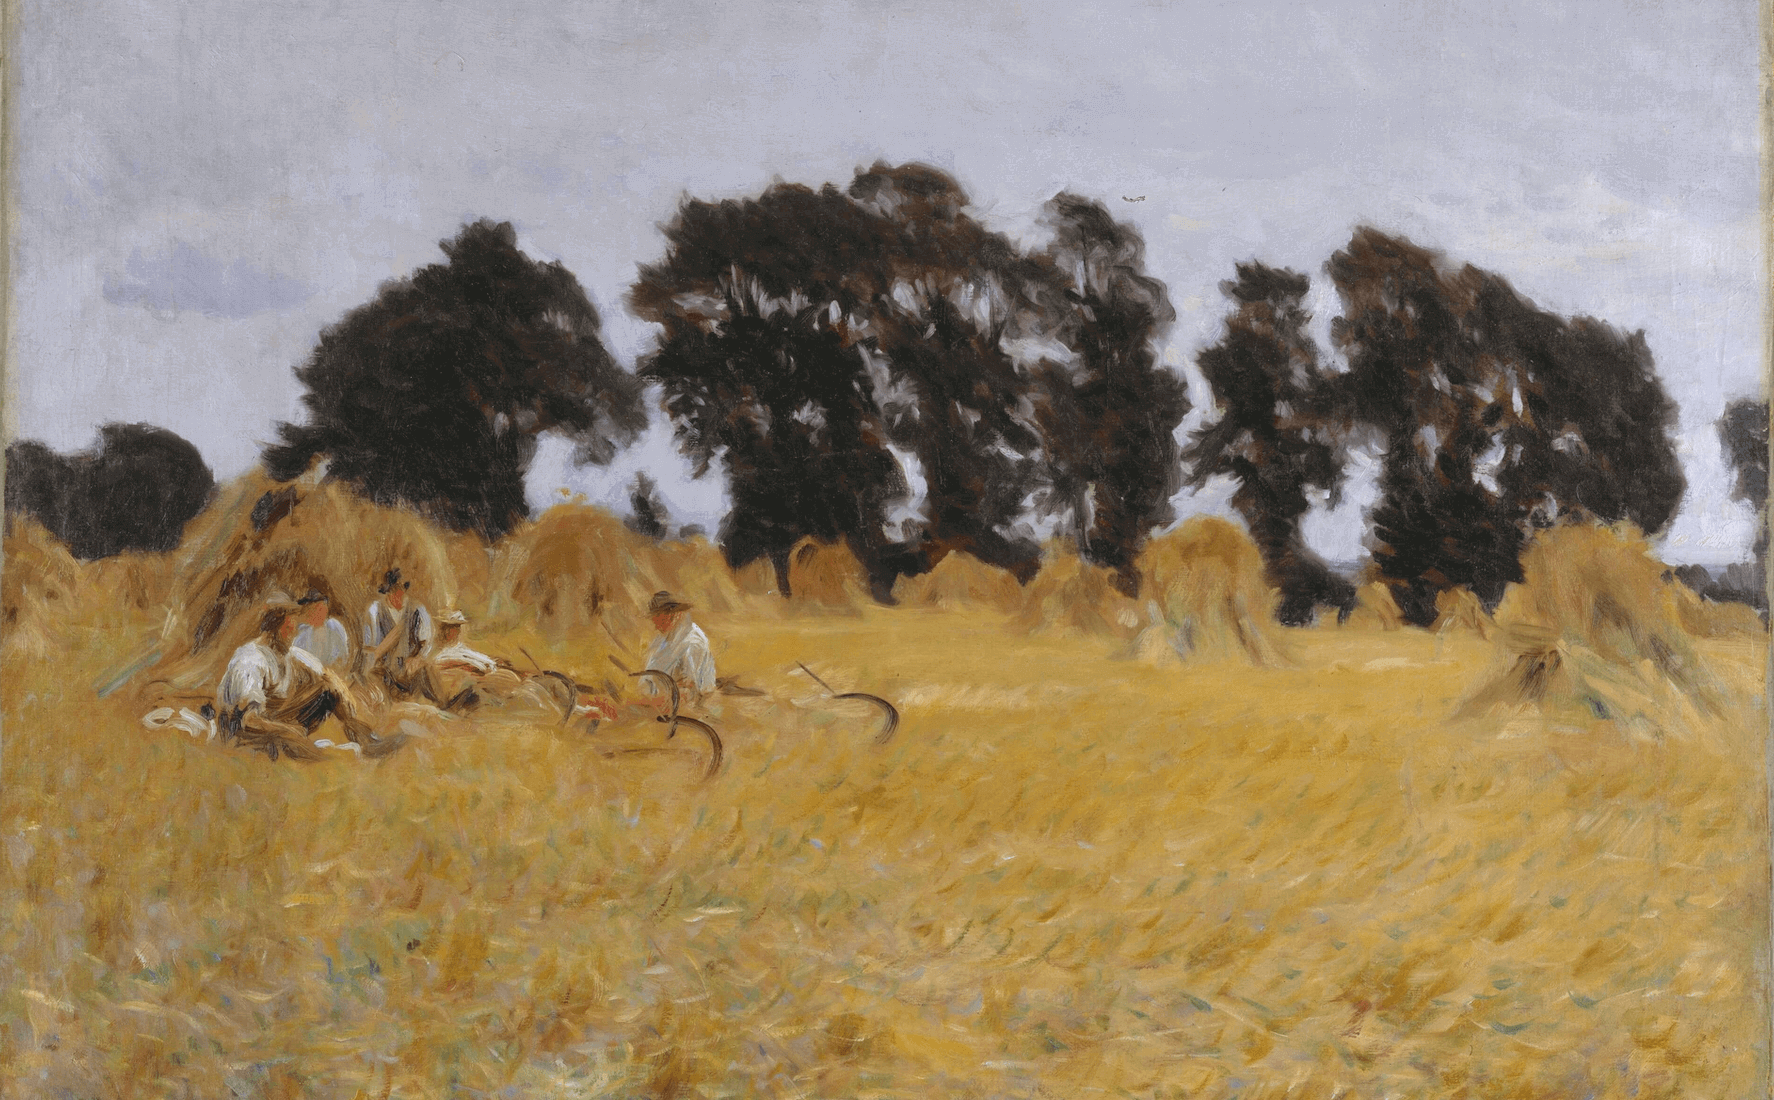 John Singer Sargent, Reapers Resting in a Wheat Field.